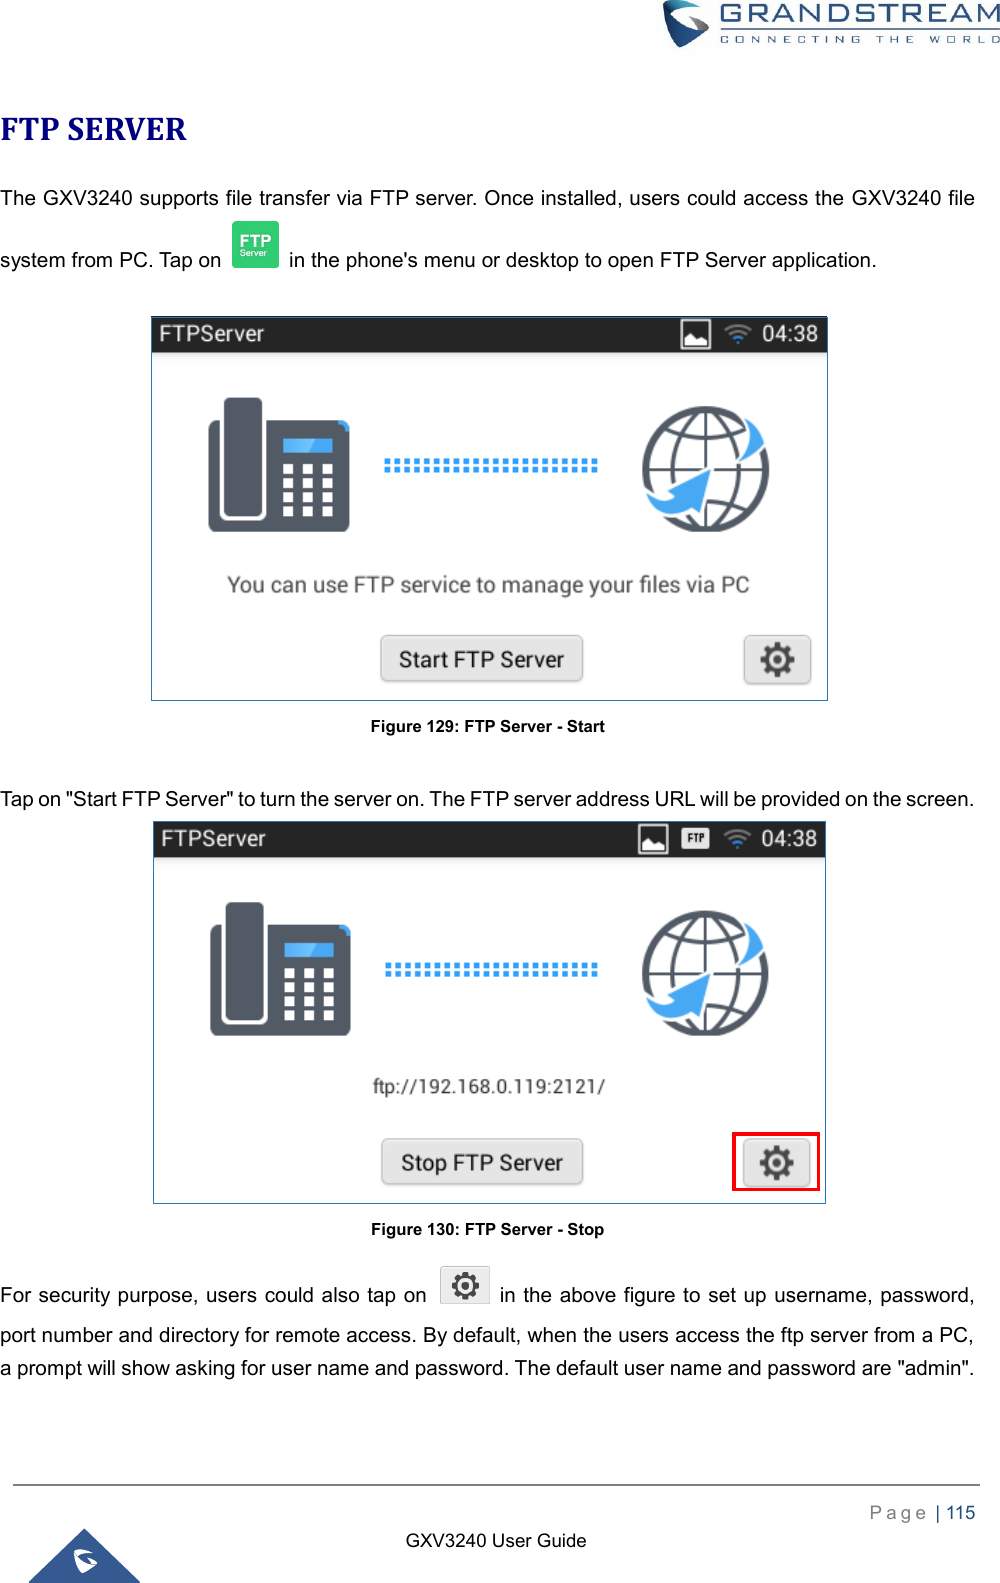    P a g e  | 115    GXV3240 User Guide  FTP SERVER The GXV3240 supports file transfer via FTP server. Once installed, users could access the GXV3240 file system from PC. Tap on    in the phone&apos;s menu or desktop to open FTP Server application.   Figure 129: FTP Server - Start  Tap on &quot;Start FTP Server&quot; to turn the server on. The FTP server address URL will be provided on the screen.  Figure 130: FTP Server - Stop For security purpose, users could also tap on    in the above figure to set up username, password, port number and directory for remote access. By default, when the users access the ftp server from a PC, a prompt will show asking for user name and password. The default user name and password are &quot;admin&quot;.  